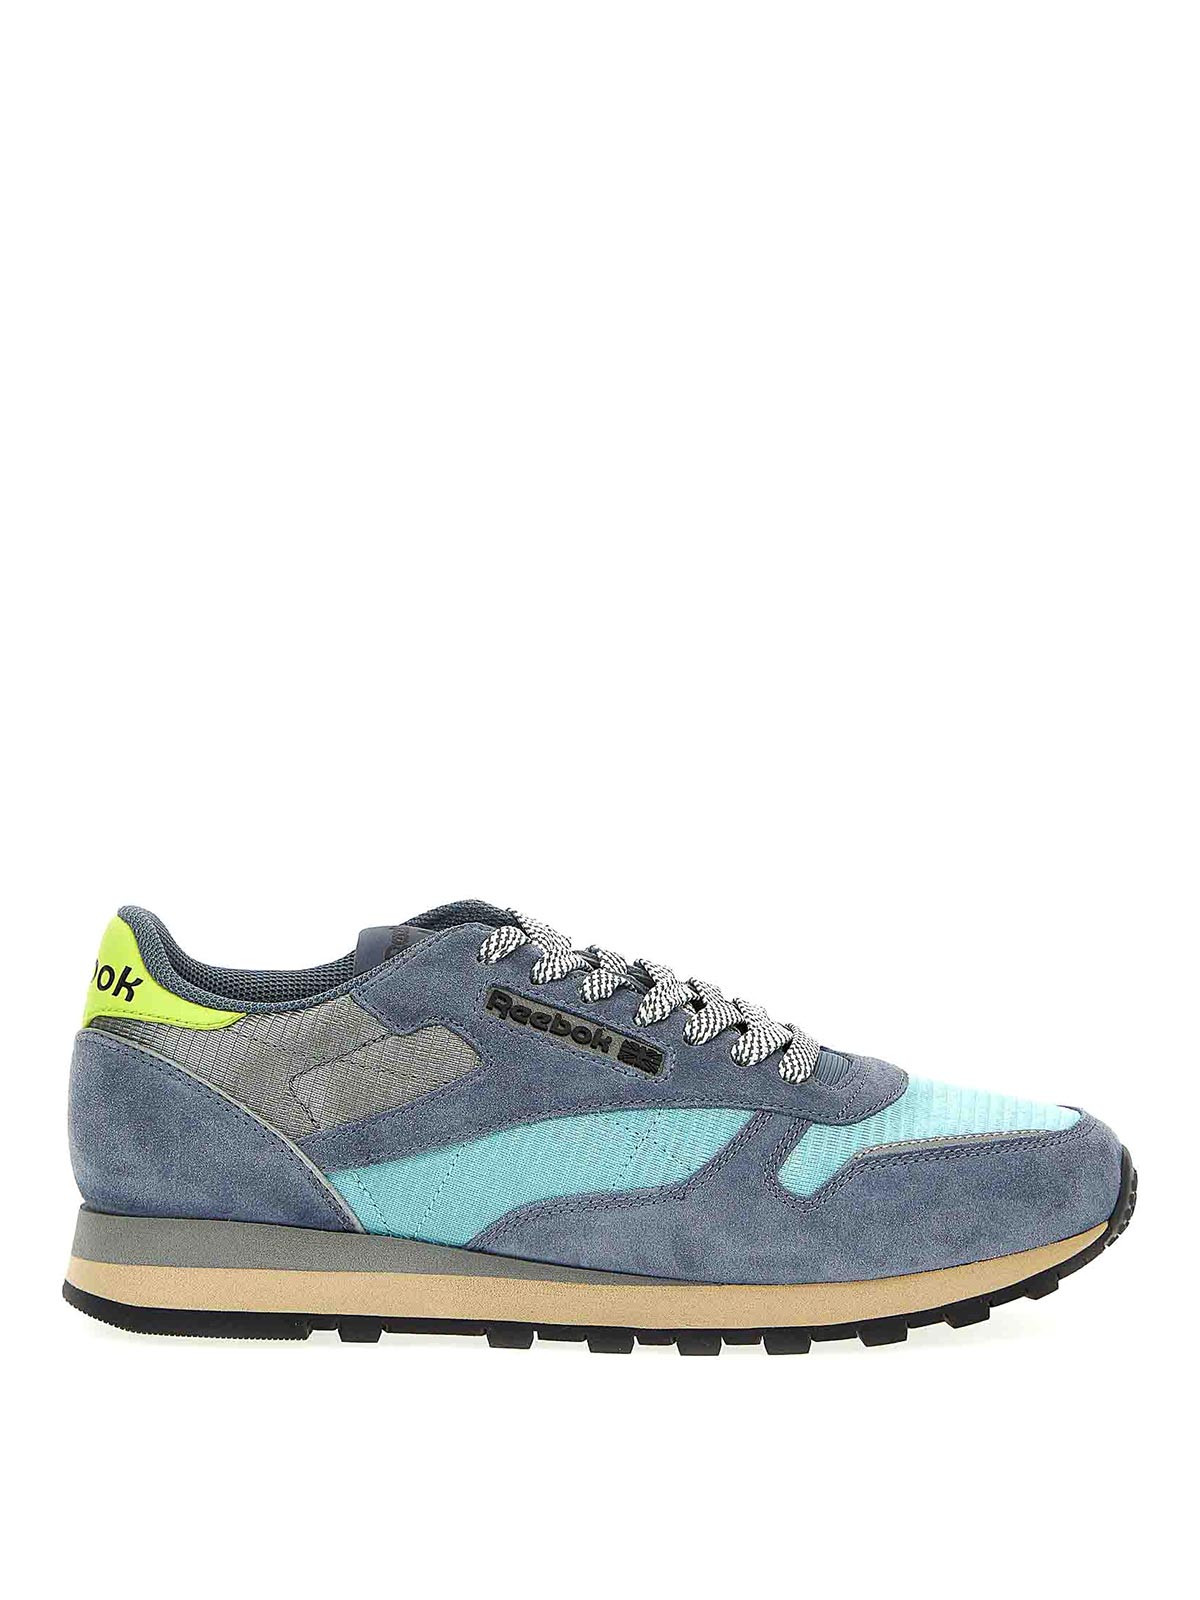 Reebok Classic Leather Trainers In Light Blue